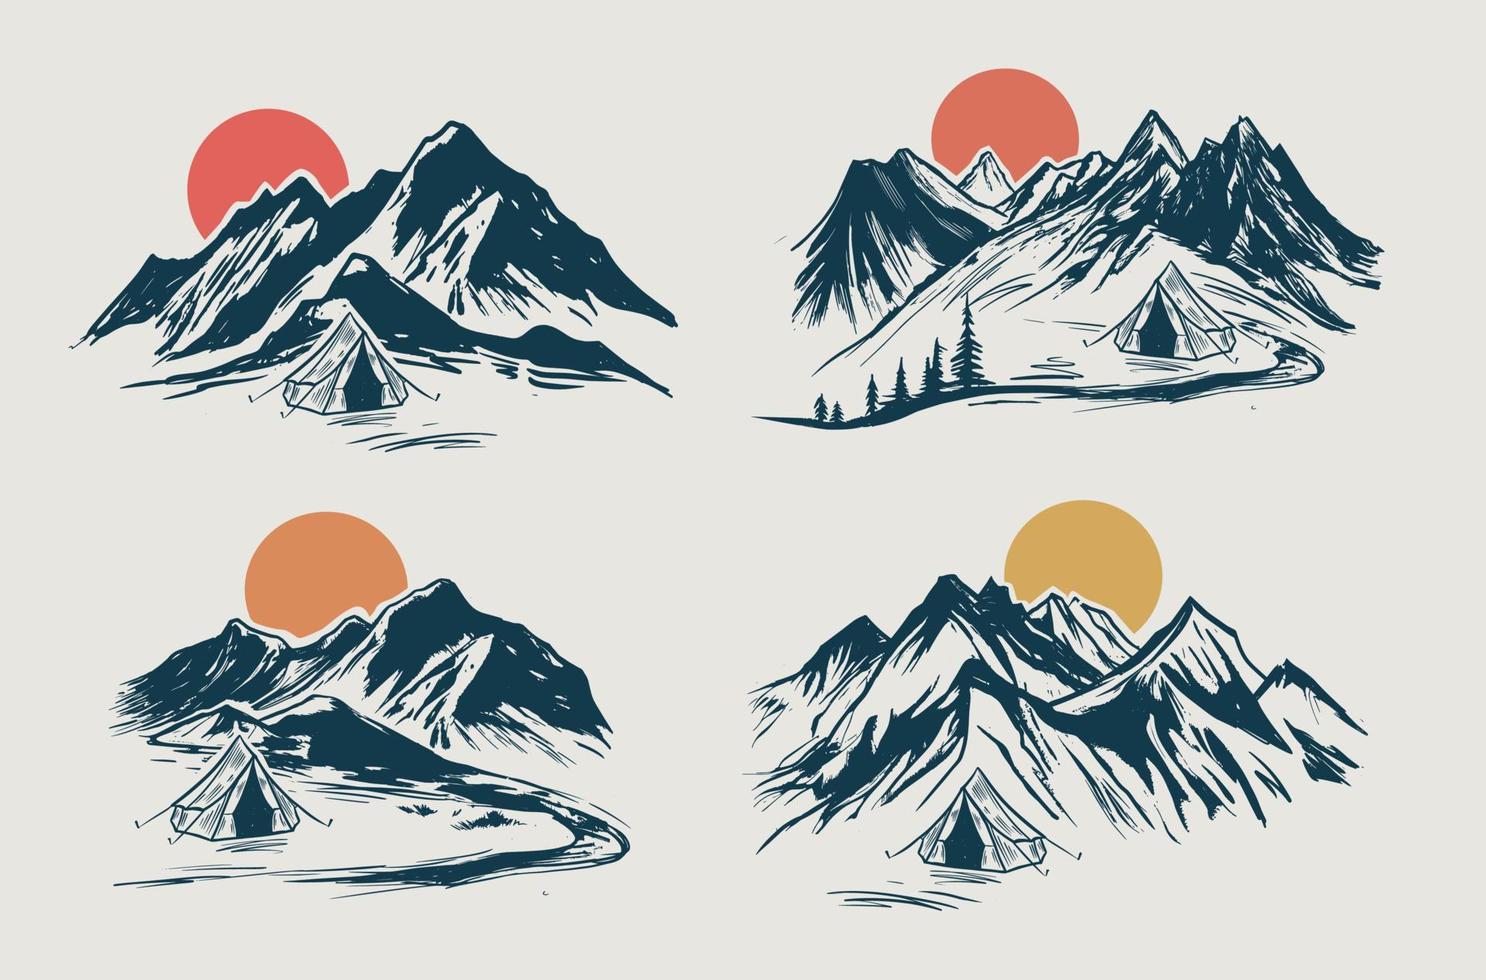 Camping, Mountain landscape, sketch style, vector illustrations